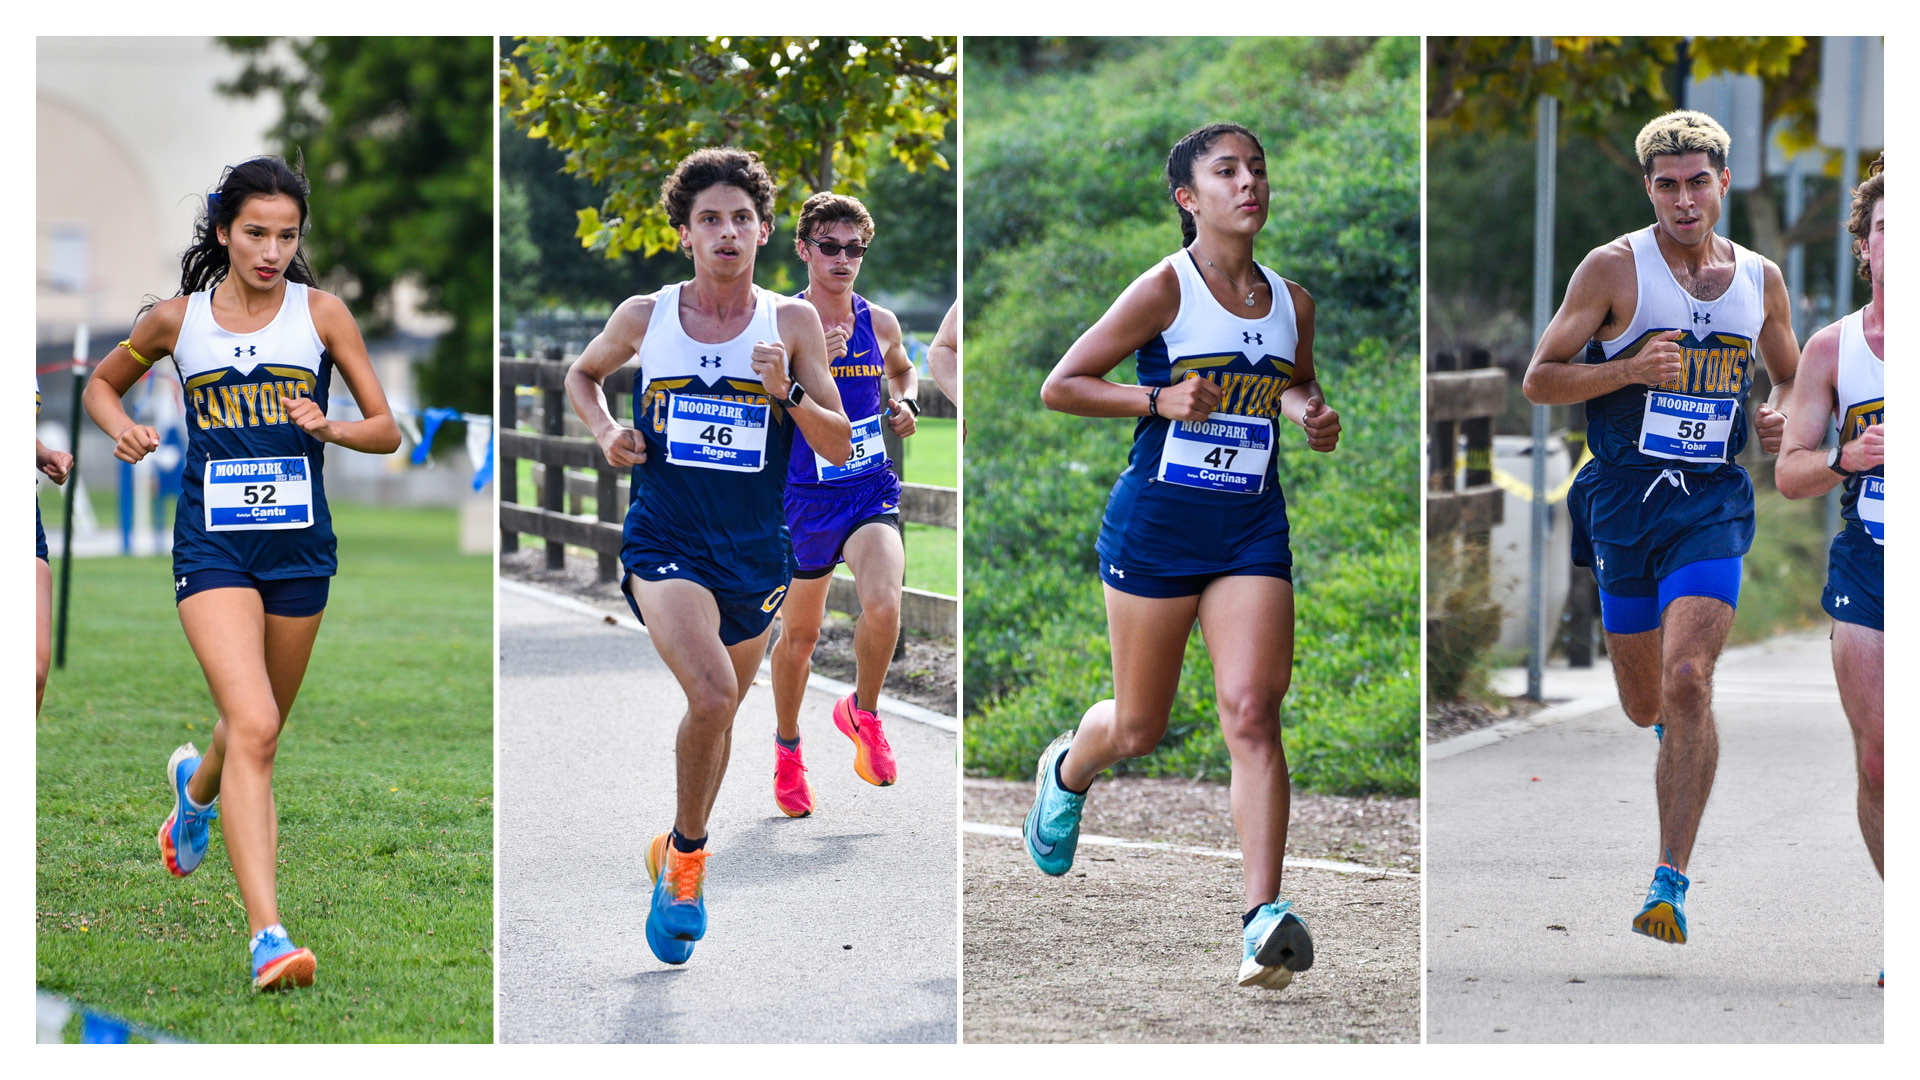 Photo collage of cross country student-athletes Katelyn Catu, Sam Regez, Kaiya Cortina's and Cesar Tobar in action.